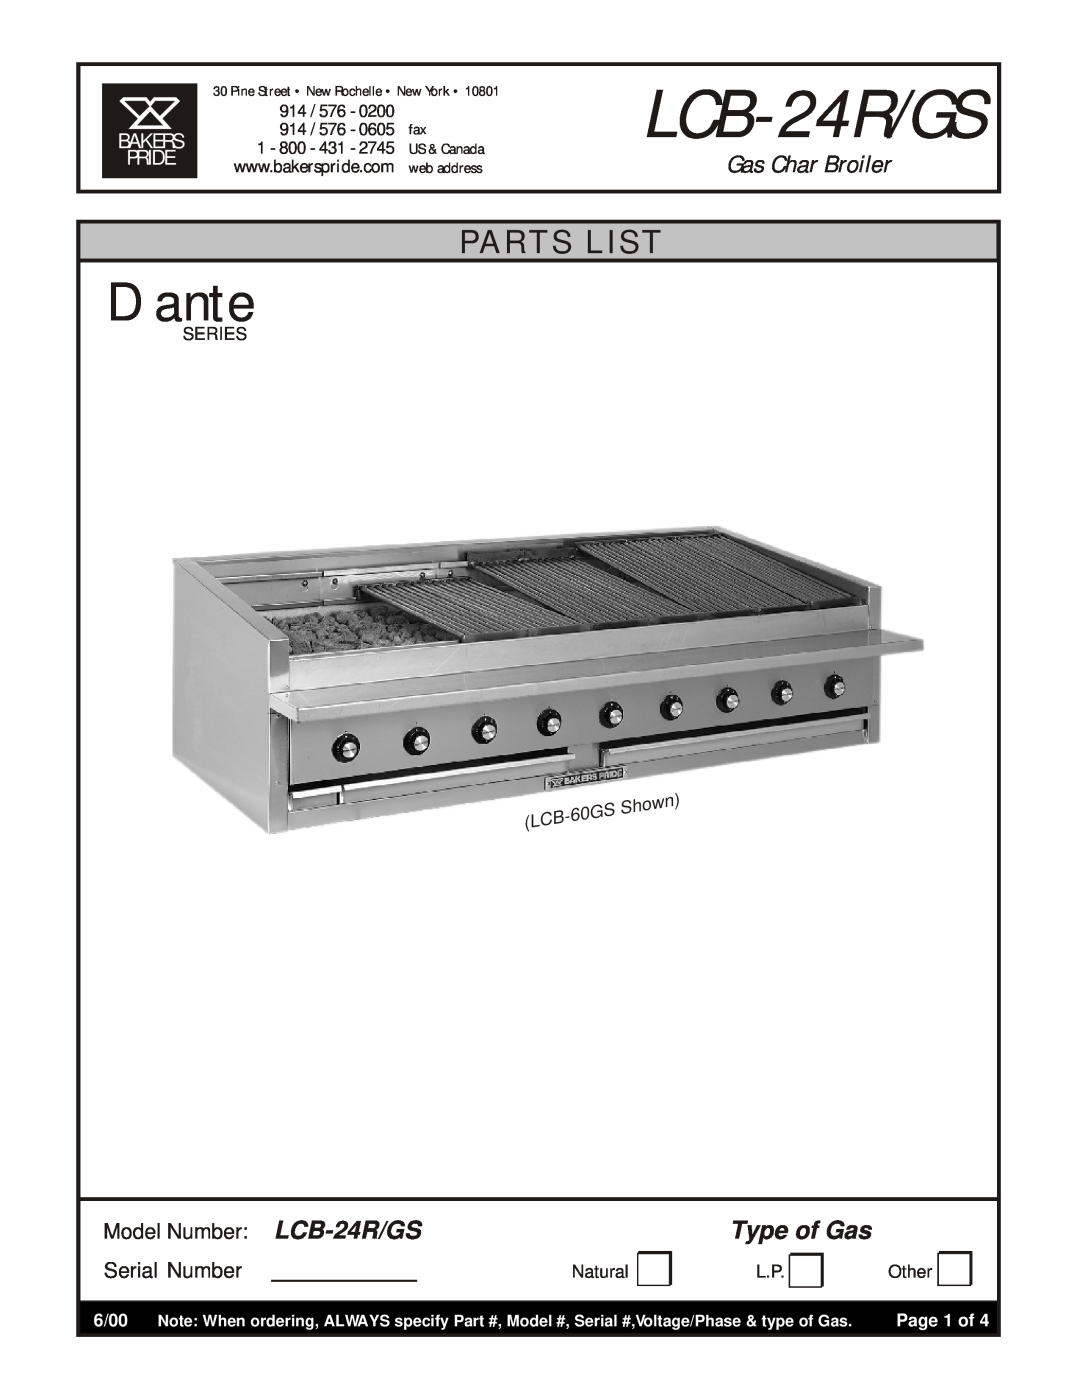 Bakers Pride Oven LCB-24R/GS manual Gas Char Broiler, Type of Gas, 0200, 0605, 2745, Series, Natural, Other, Dante, Bakers 